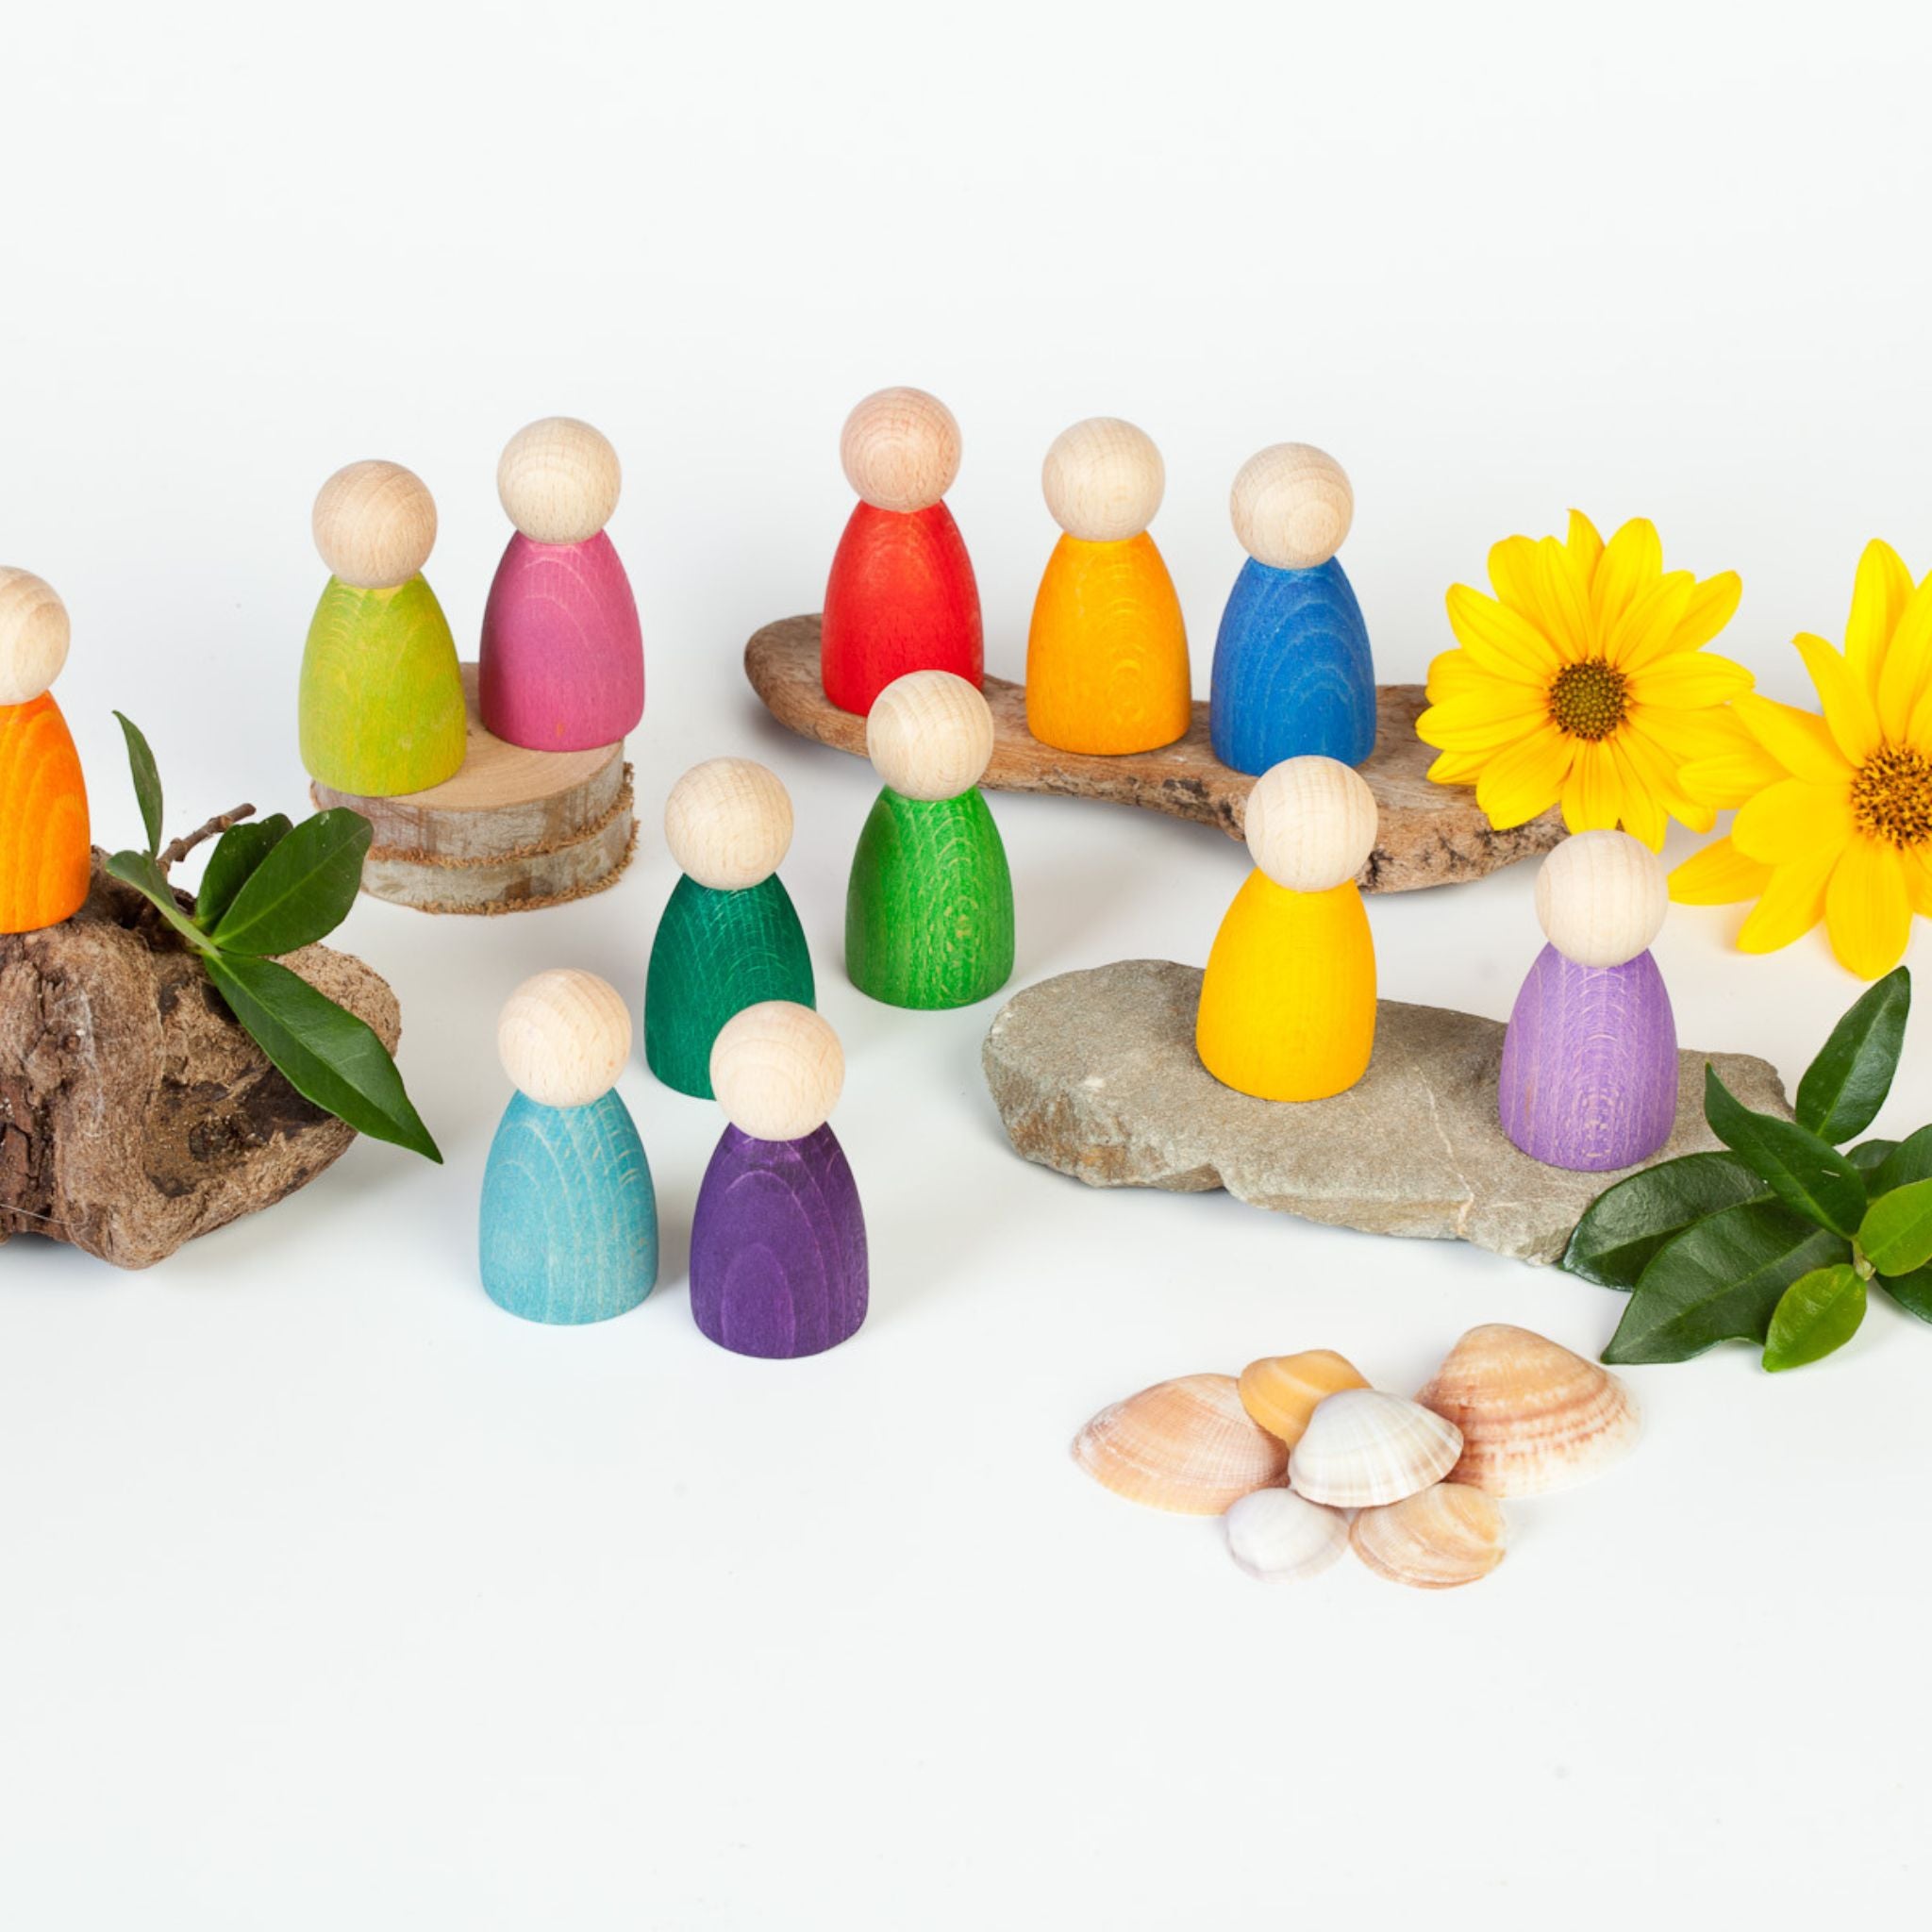 Grapat 12 Nins, Peg Dolls With Pieces From Nature